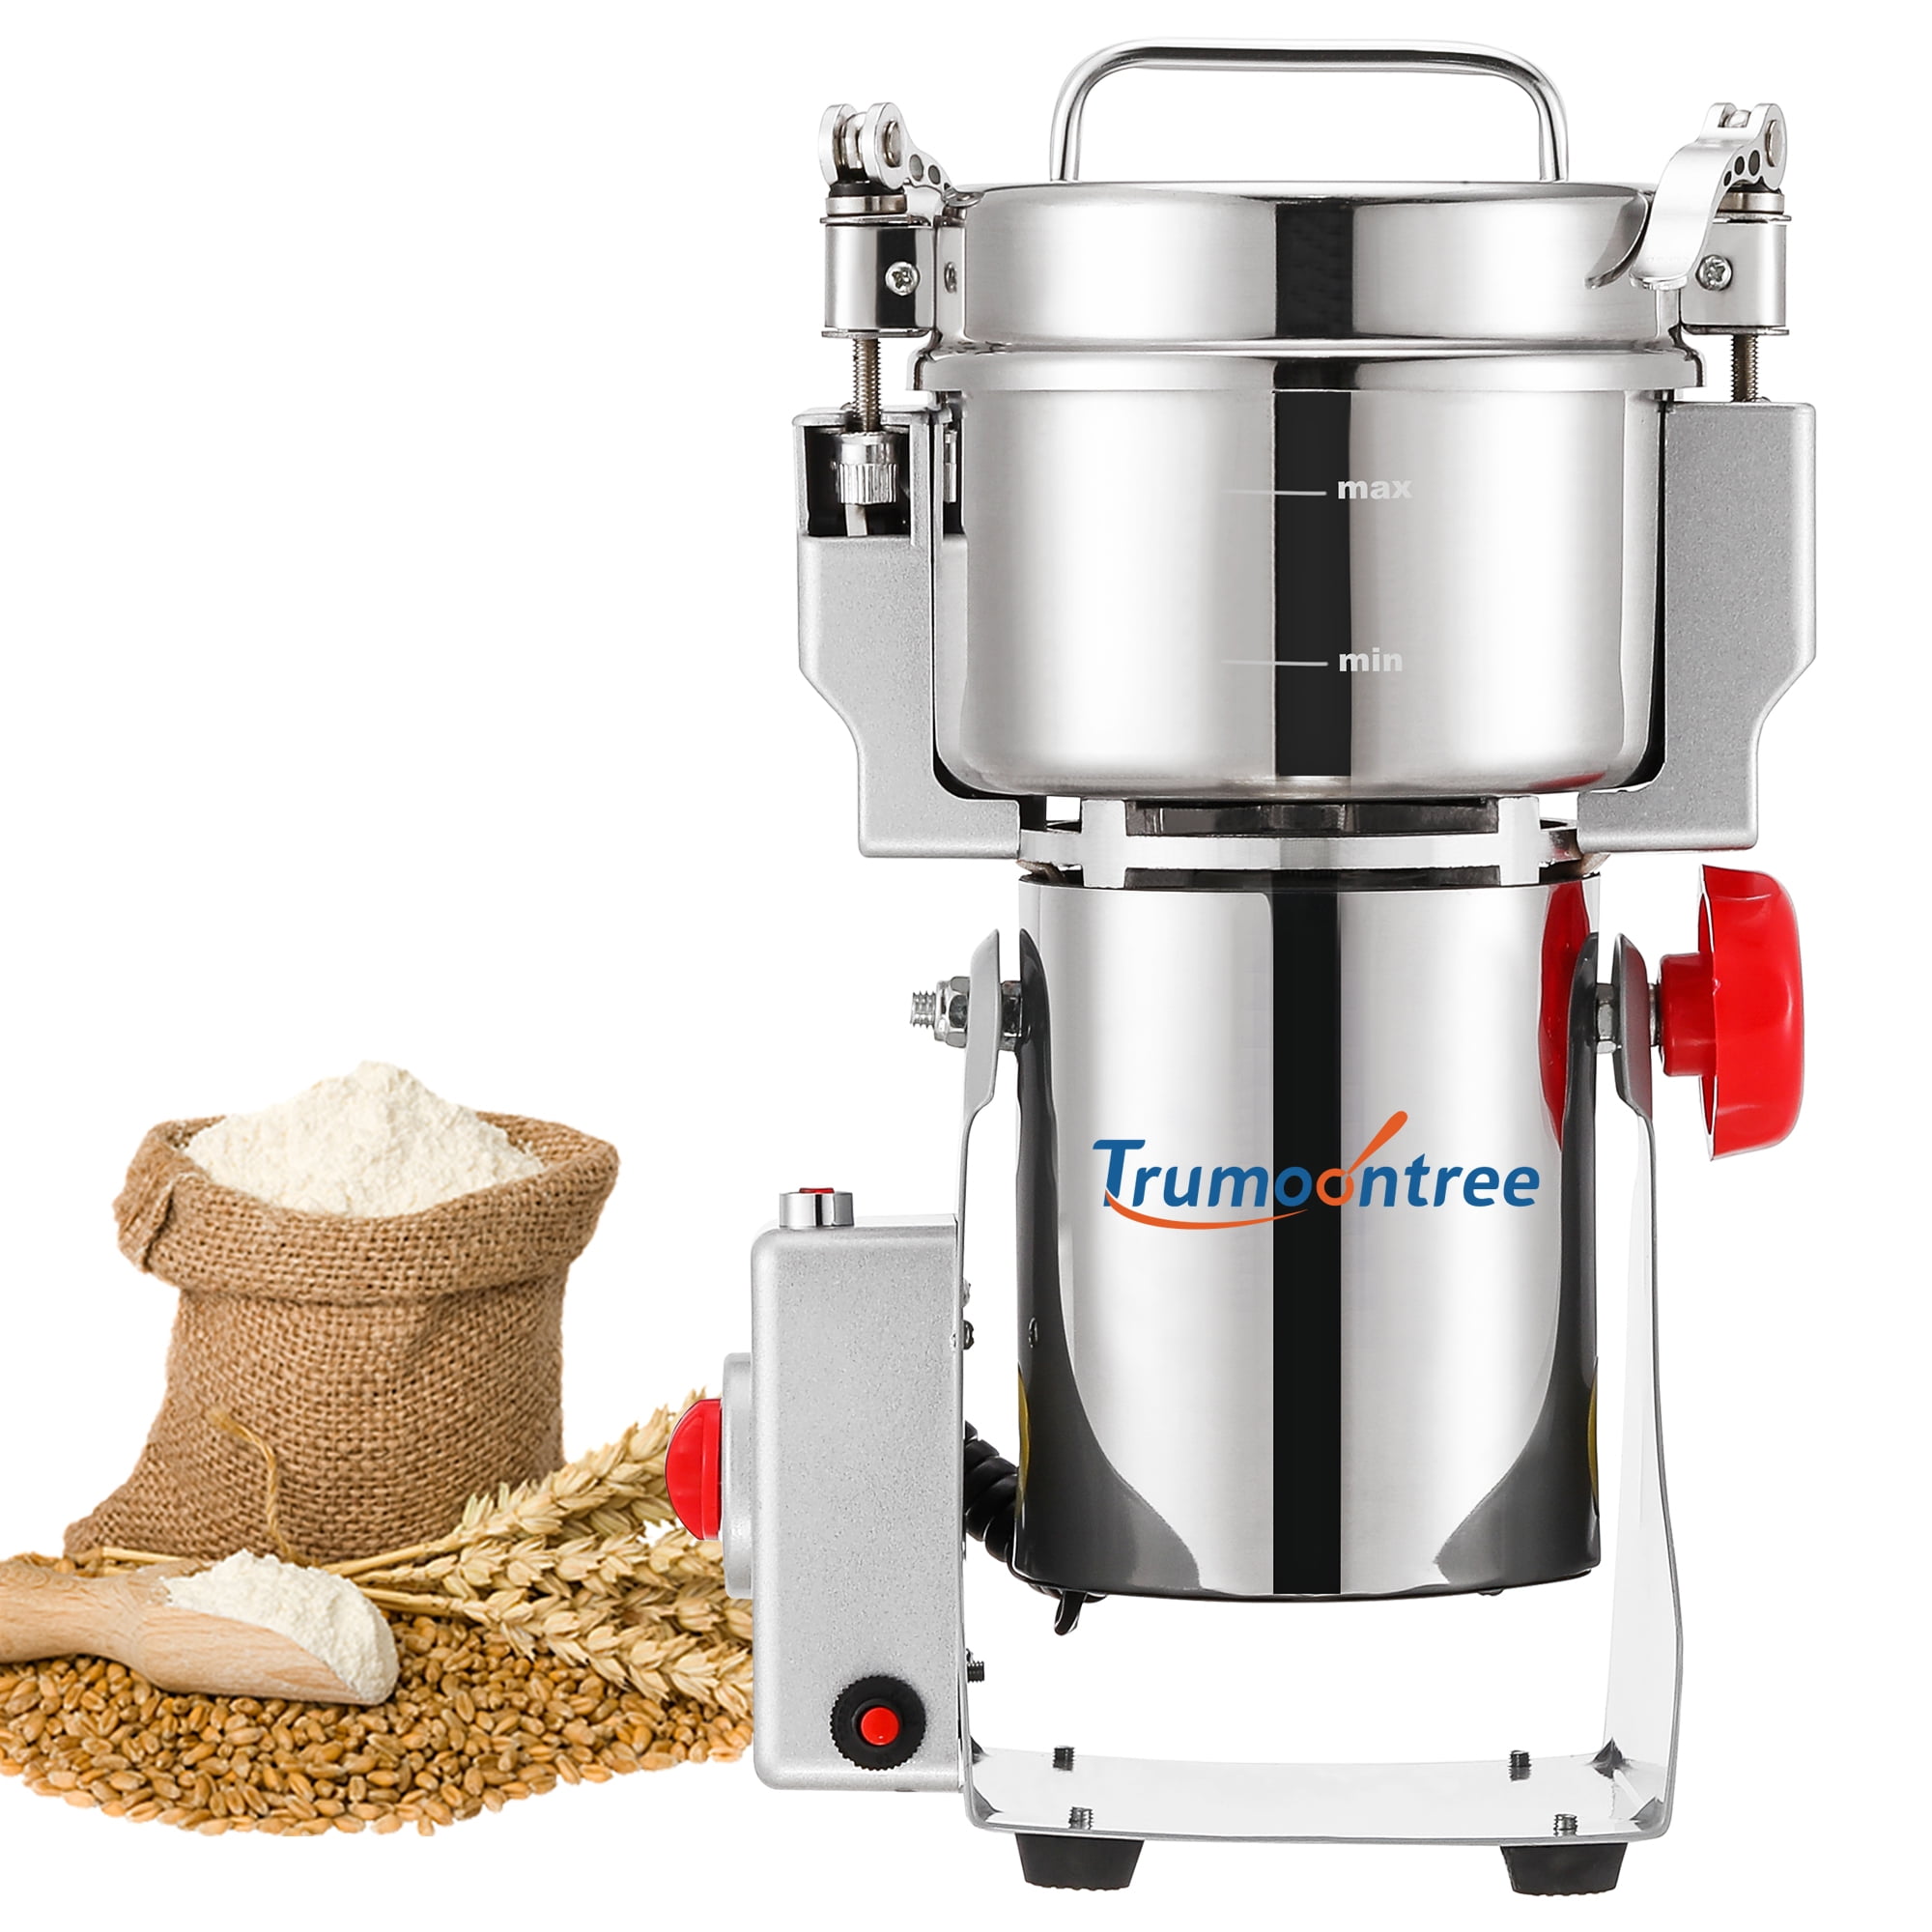 Duronic Electric Spice Grinder Mill CG300, 100g, 300W, Stainless-Steel  Blade, For Beans, Herbs, Spices, Nuts, Seeds, Pulses and Fruit